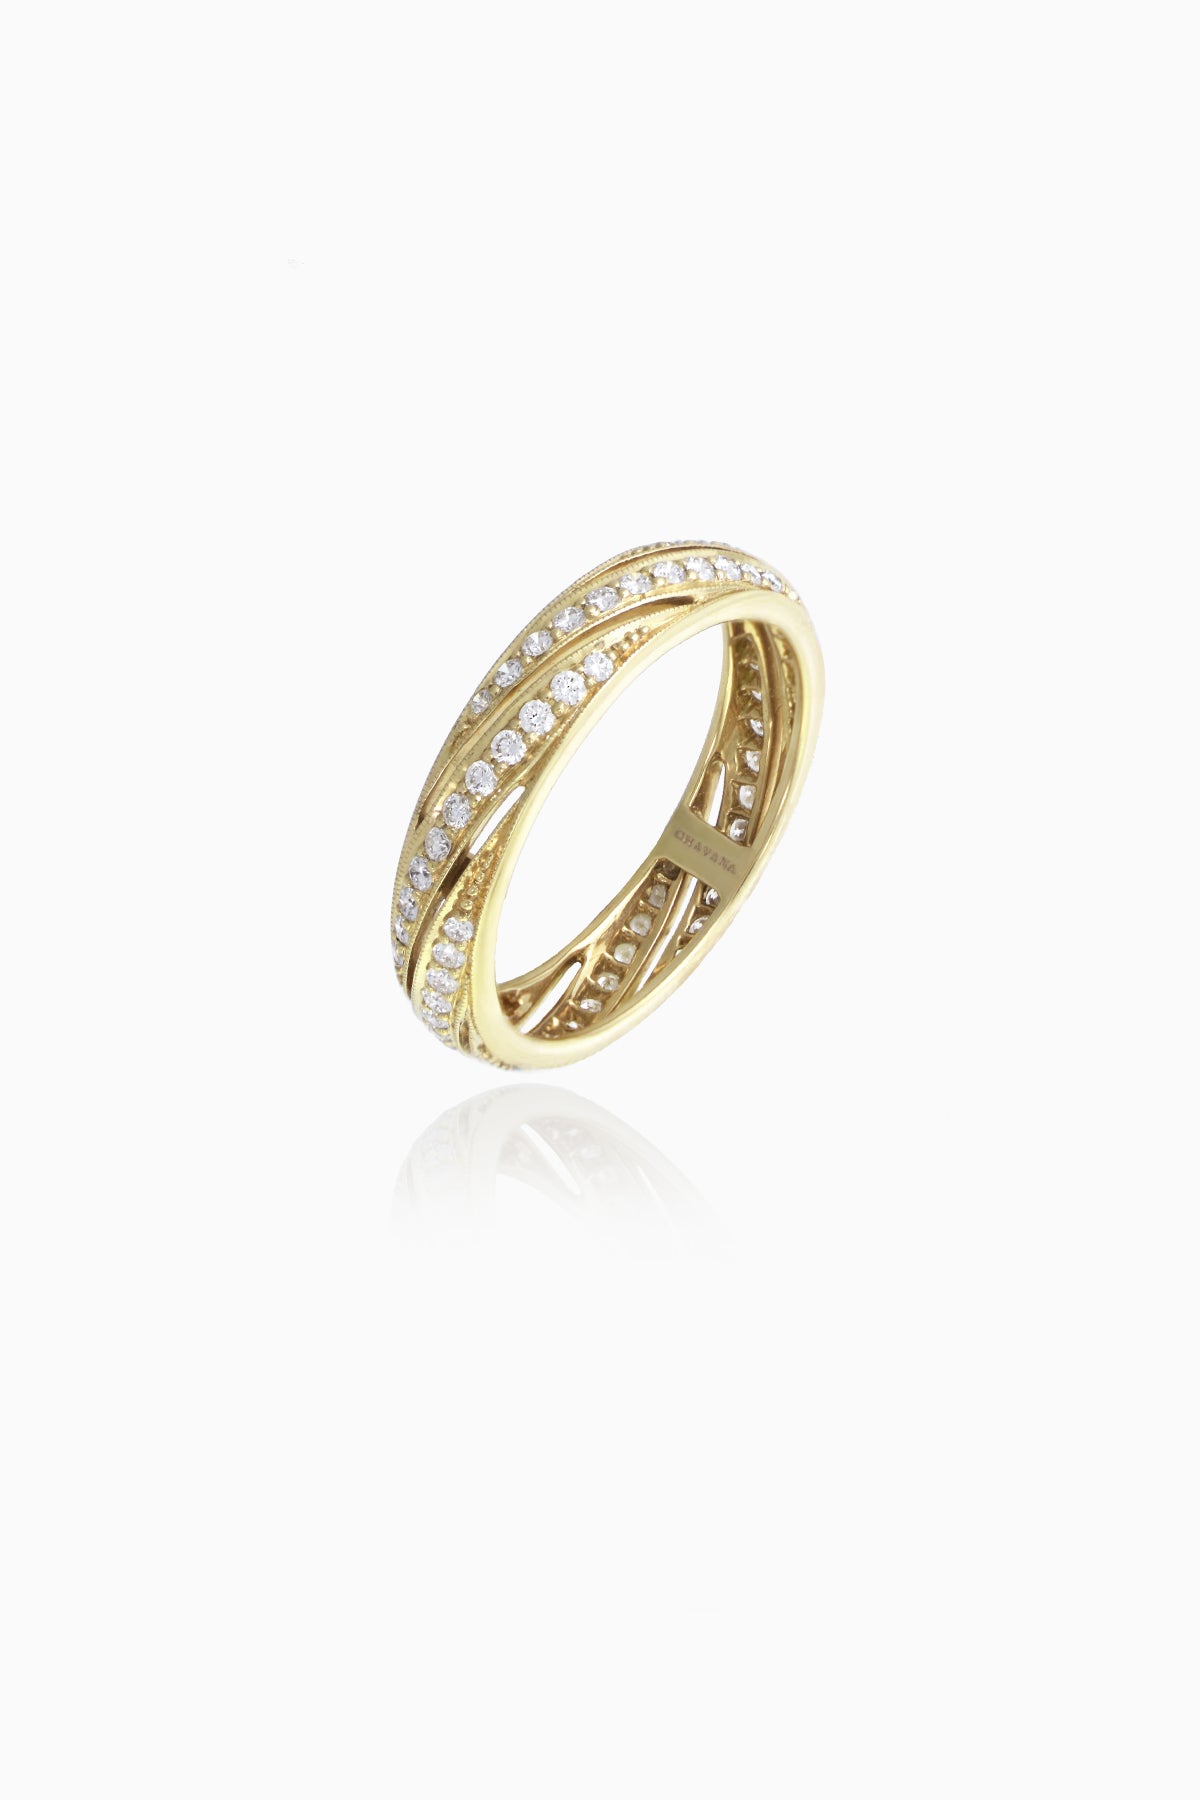 Ray of Light Band in Yellow Gold